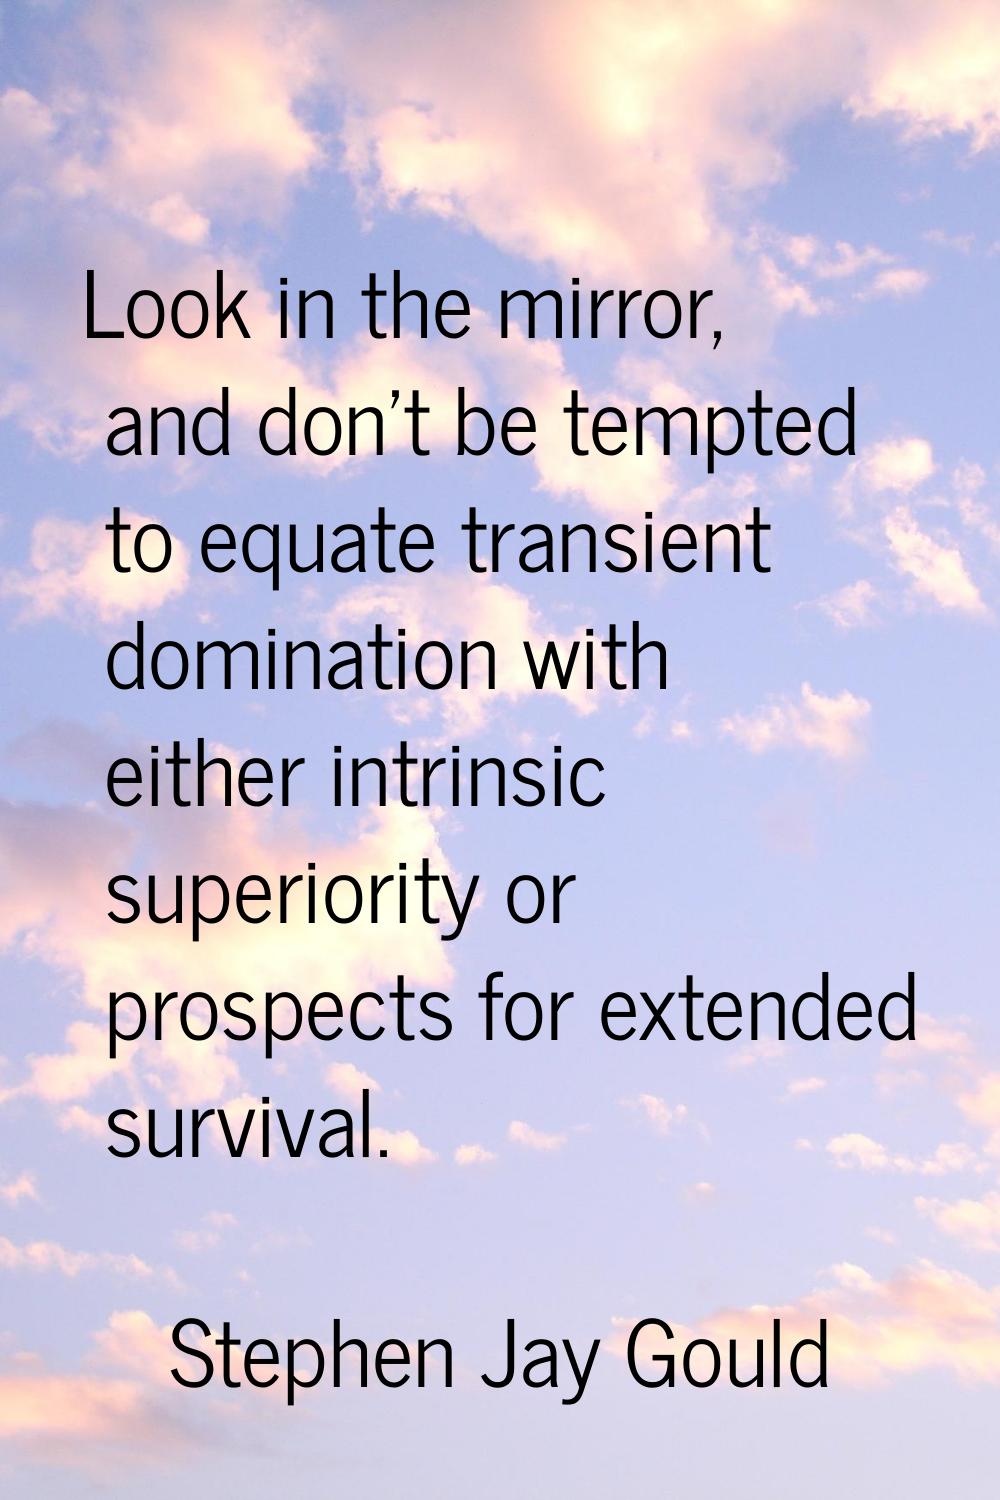 Look in the mirror, and don't be tempted to equate transient domination with either intrinsic super